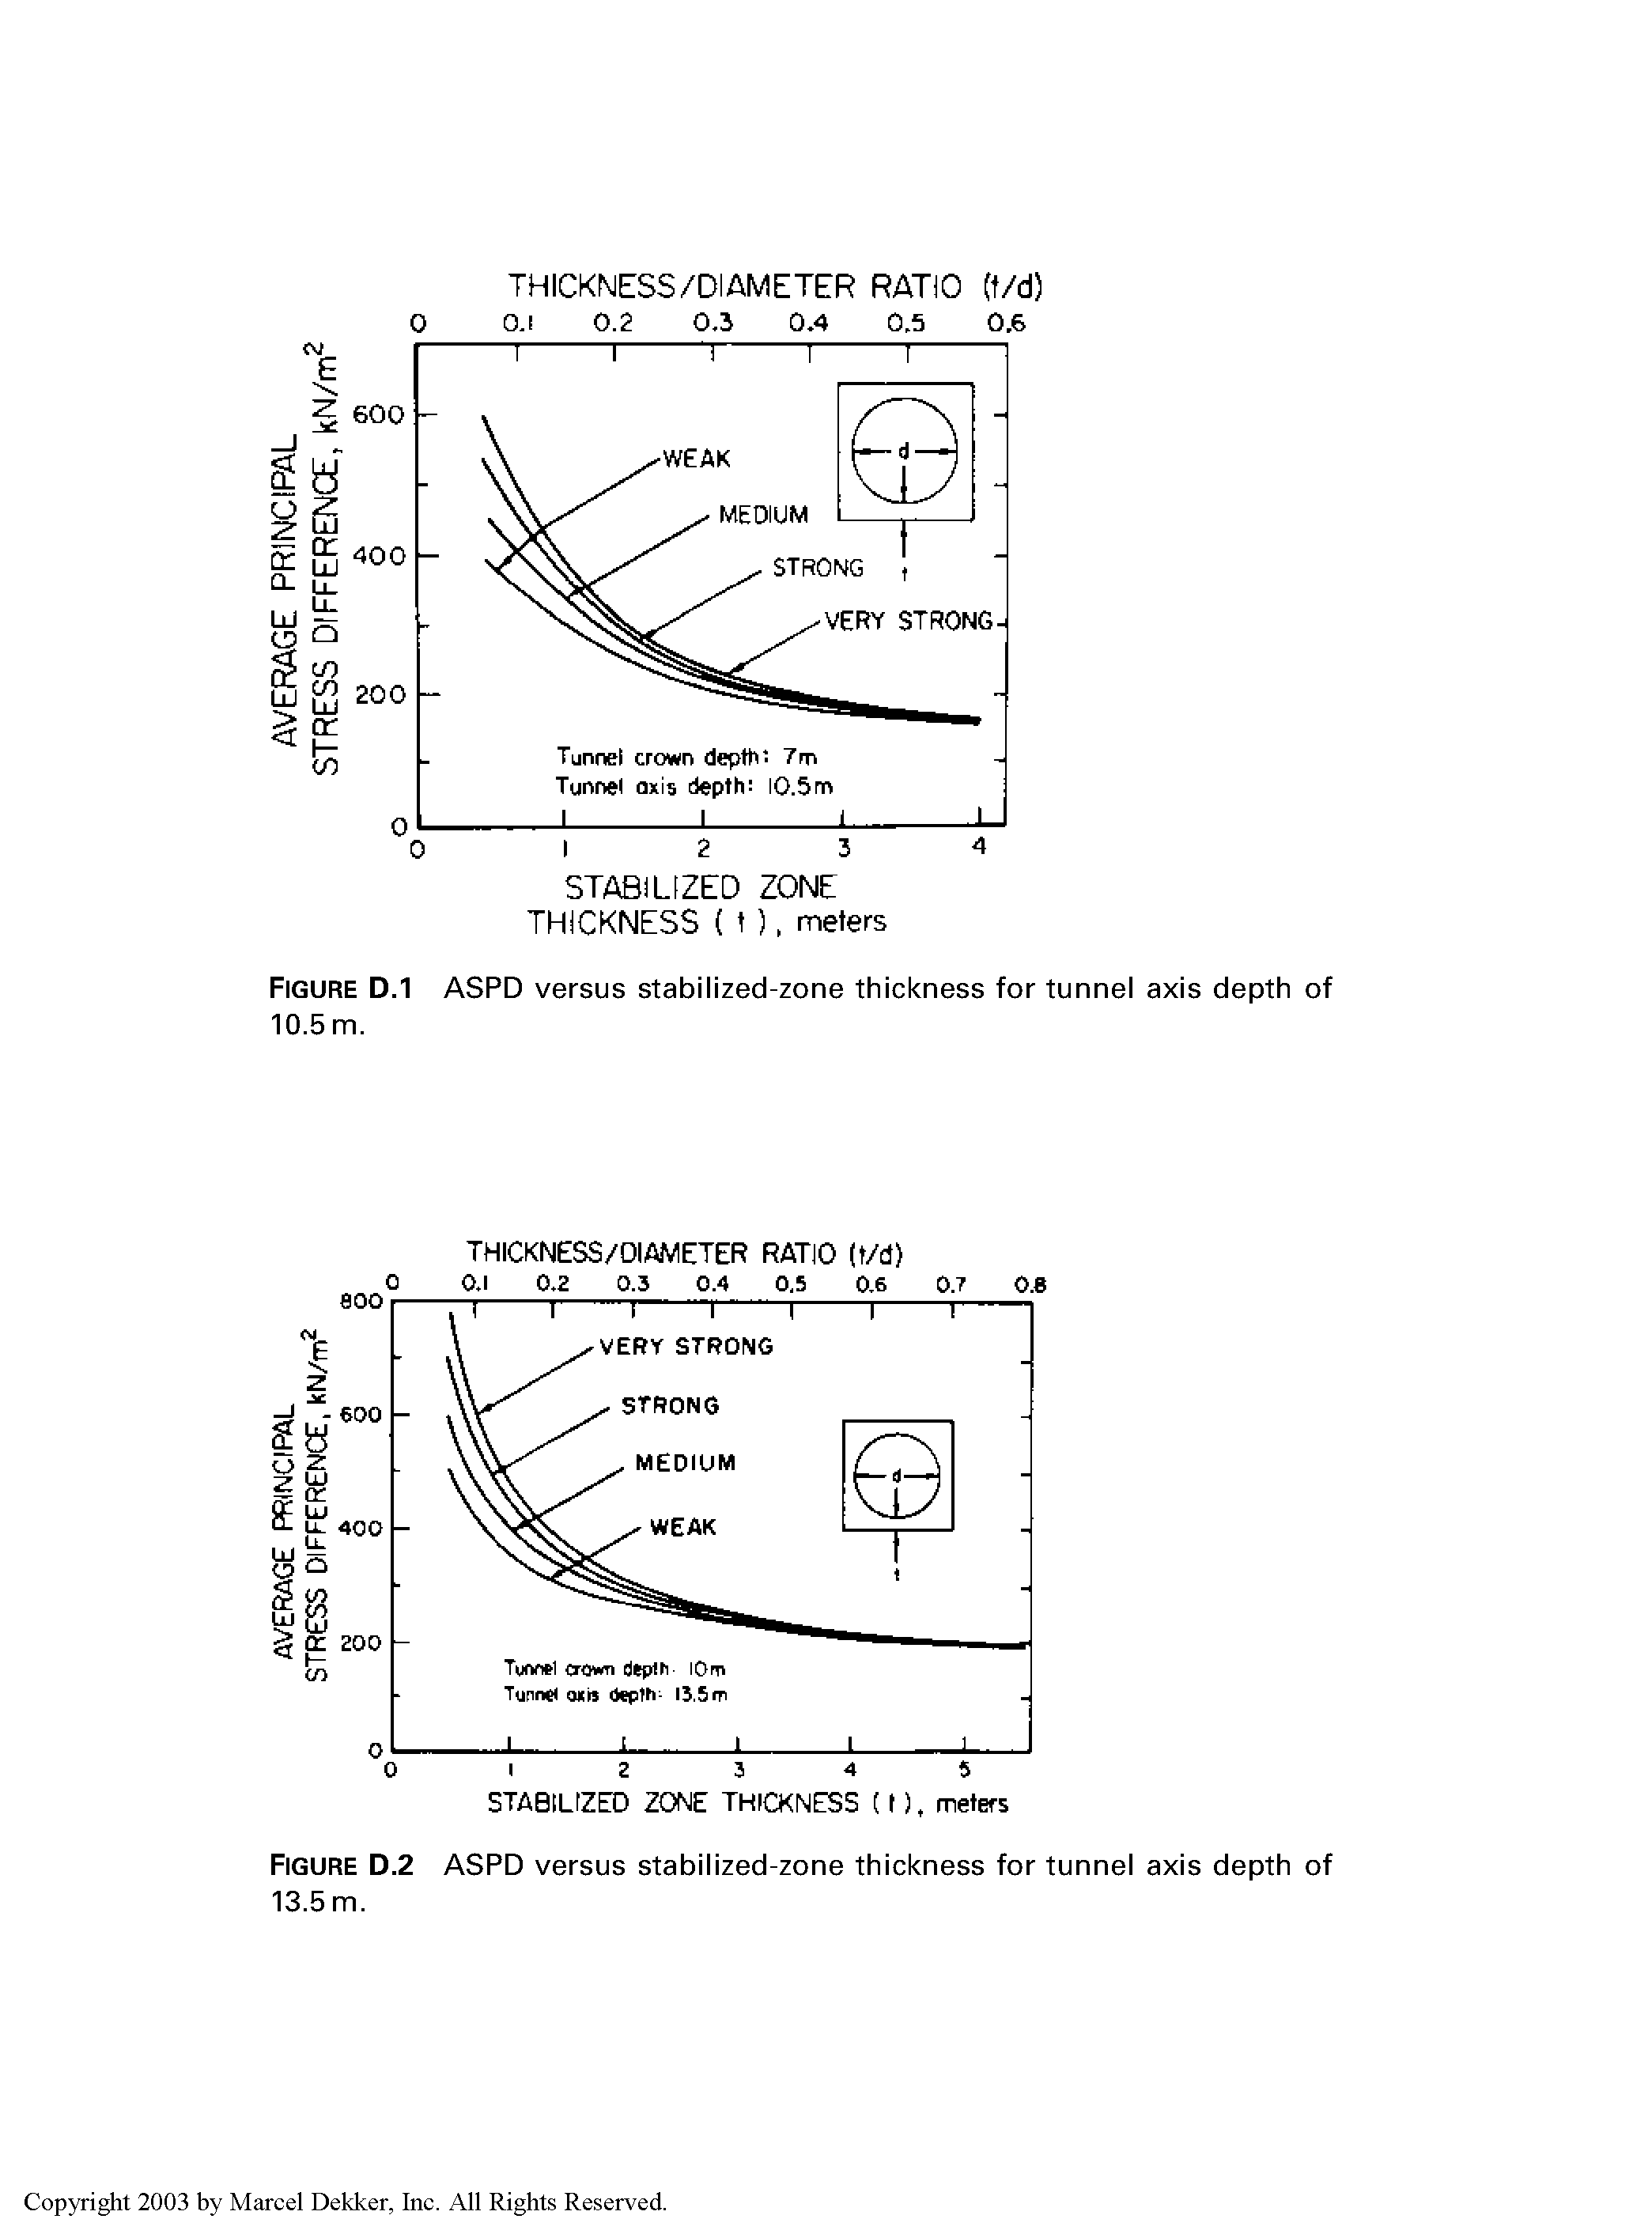 Figure D.1 ASPD versus stabilized-zone thickness for tunnel axis depth of 10.5m.